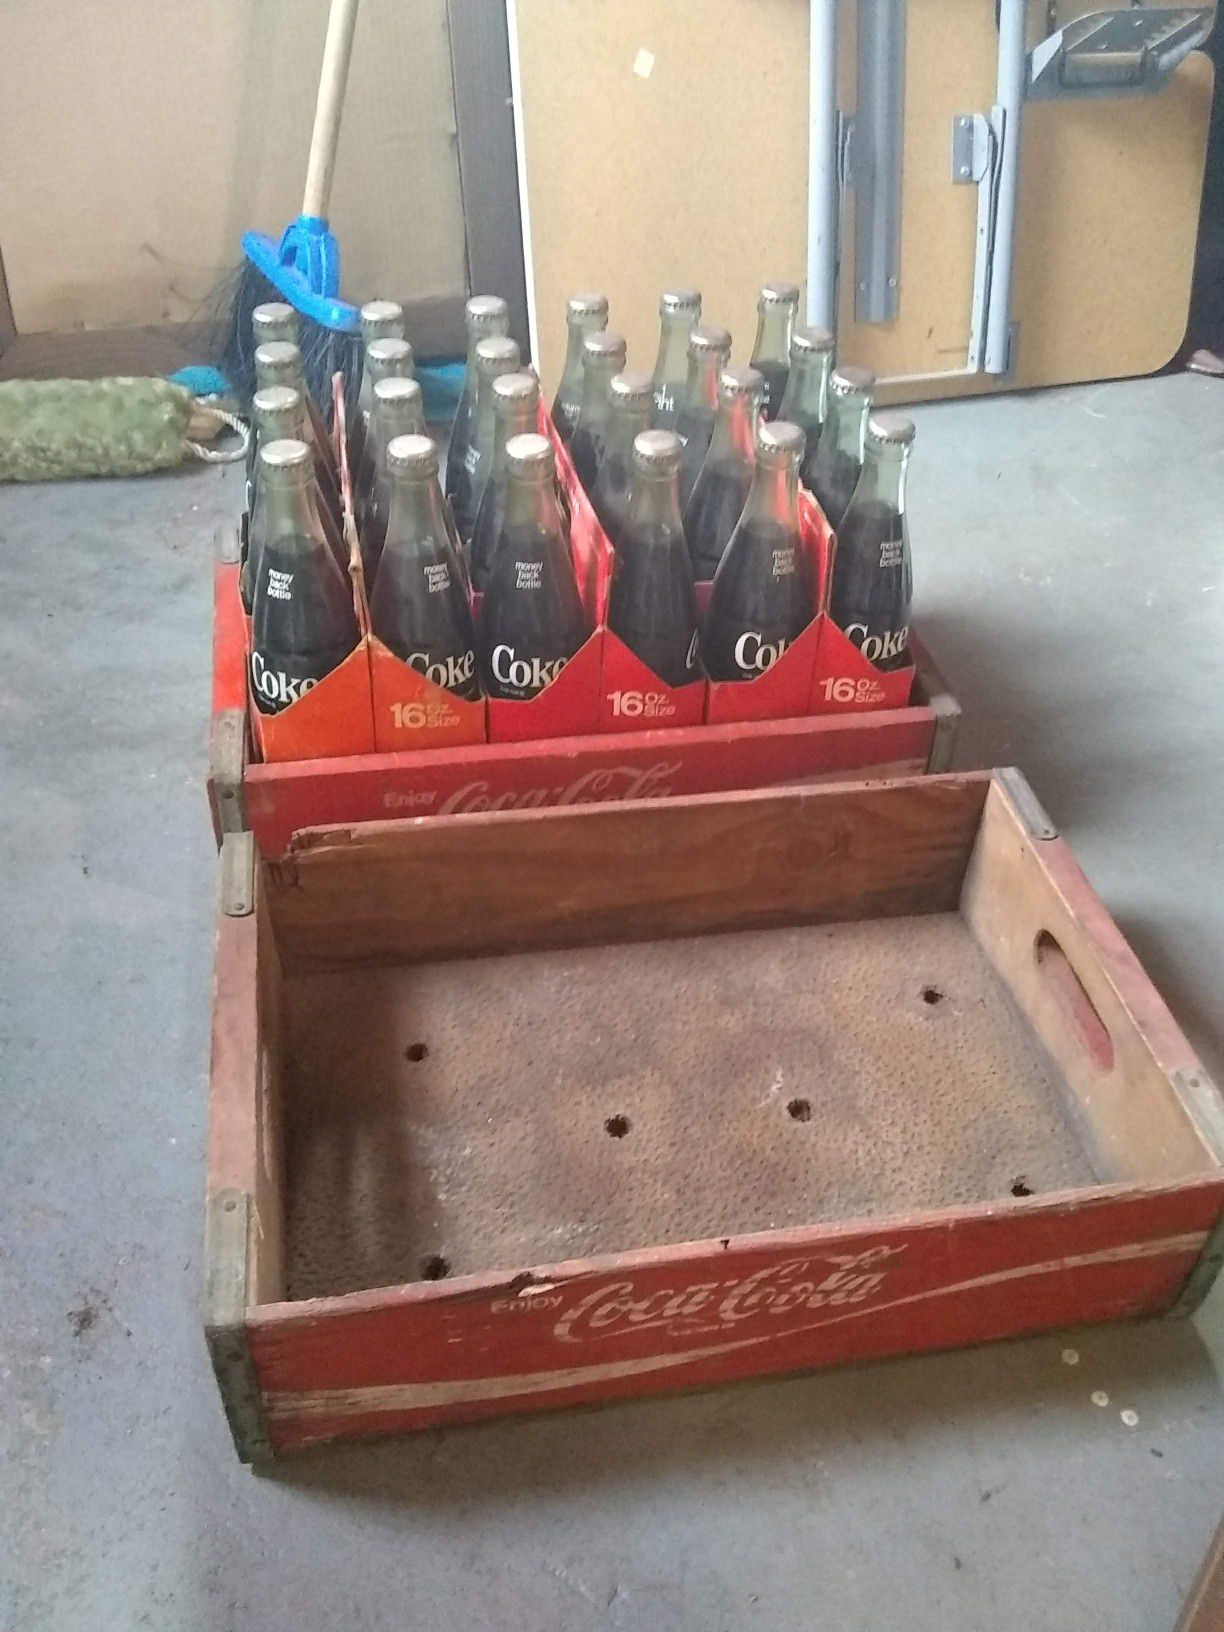 Coca cola bottles and case never opened